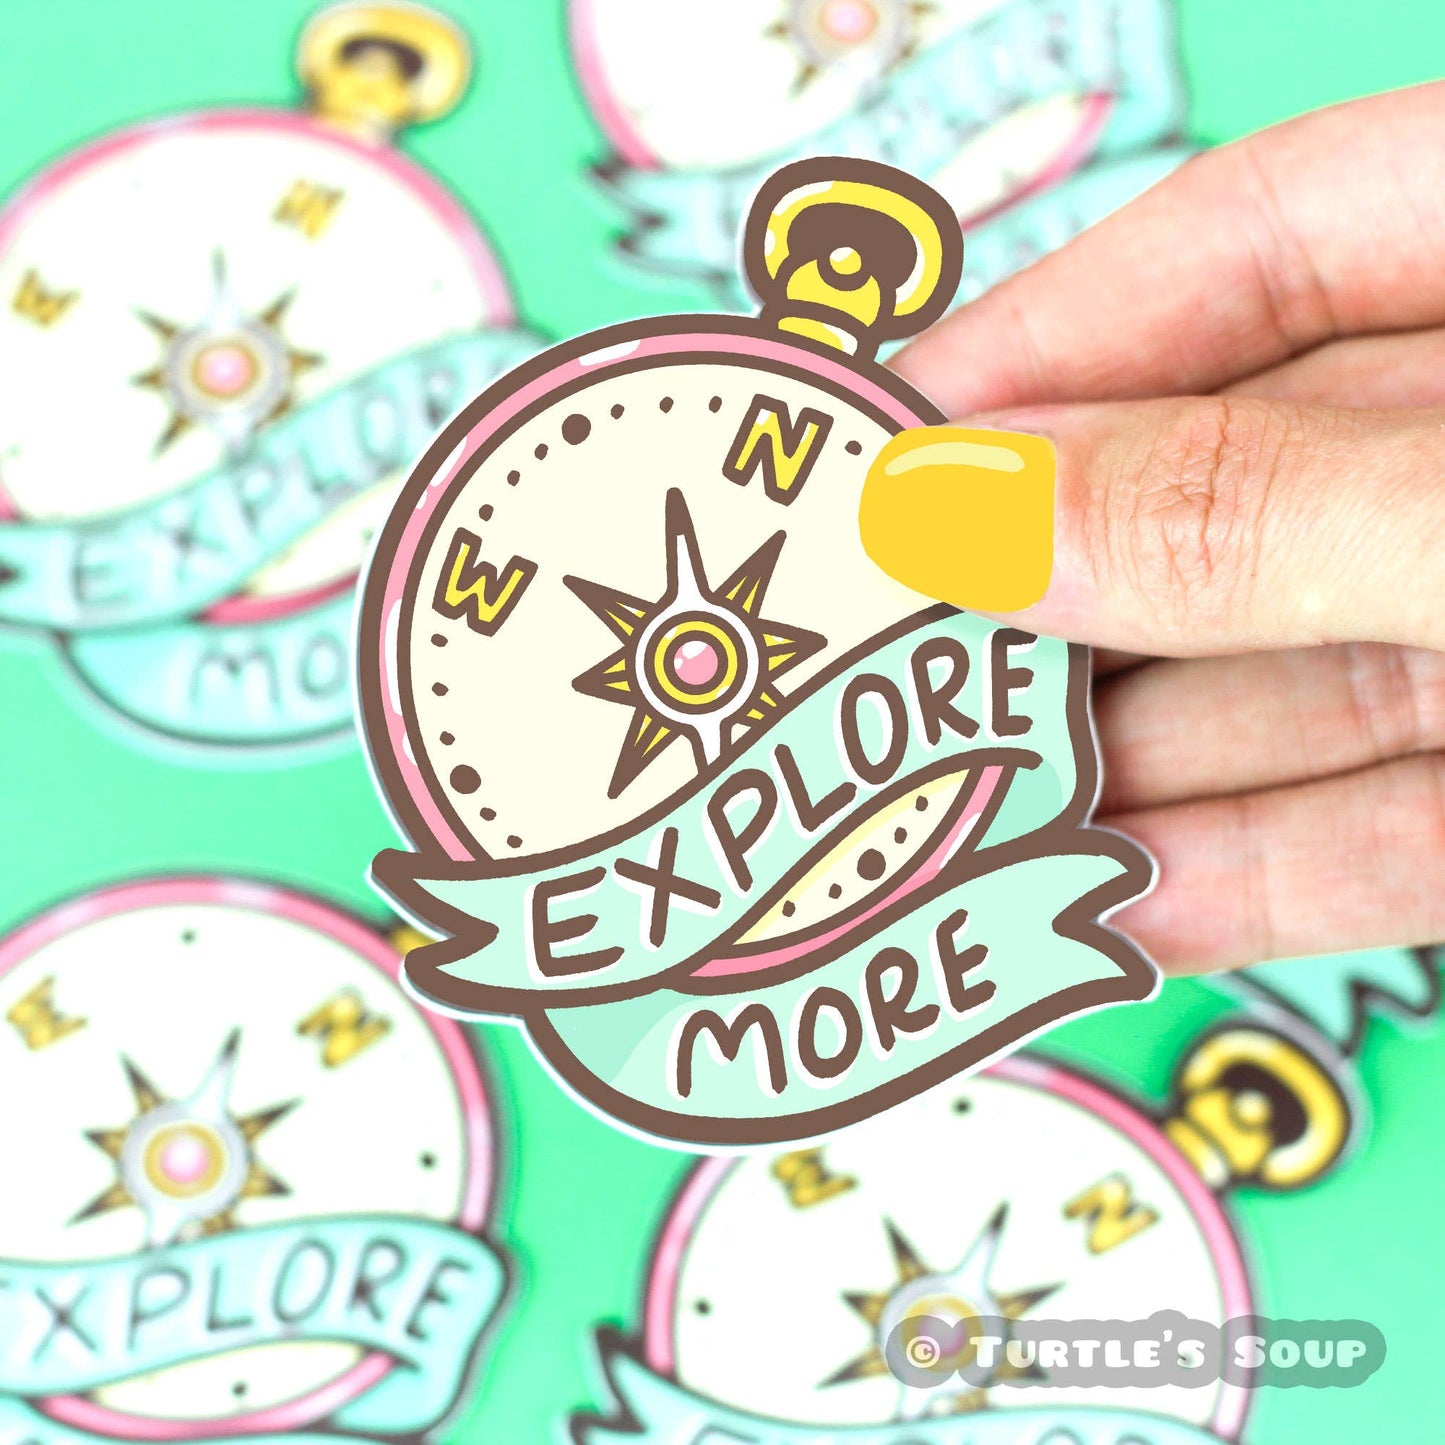 Explore more compass sticker by Turtle's Soup